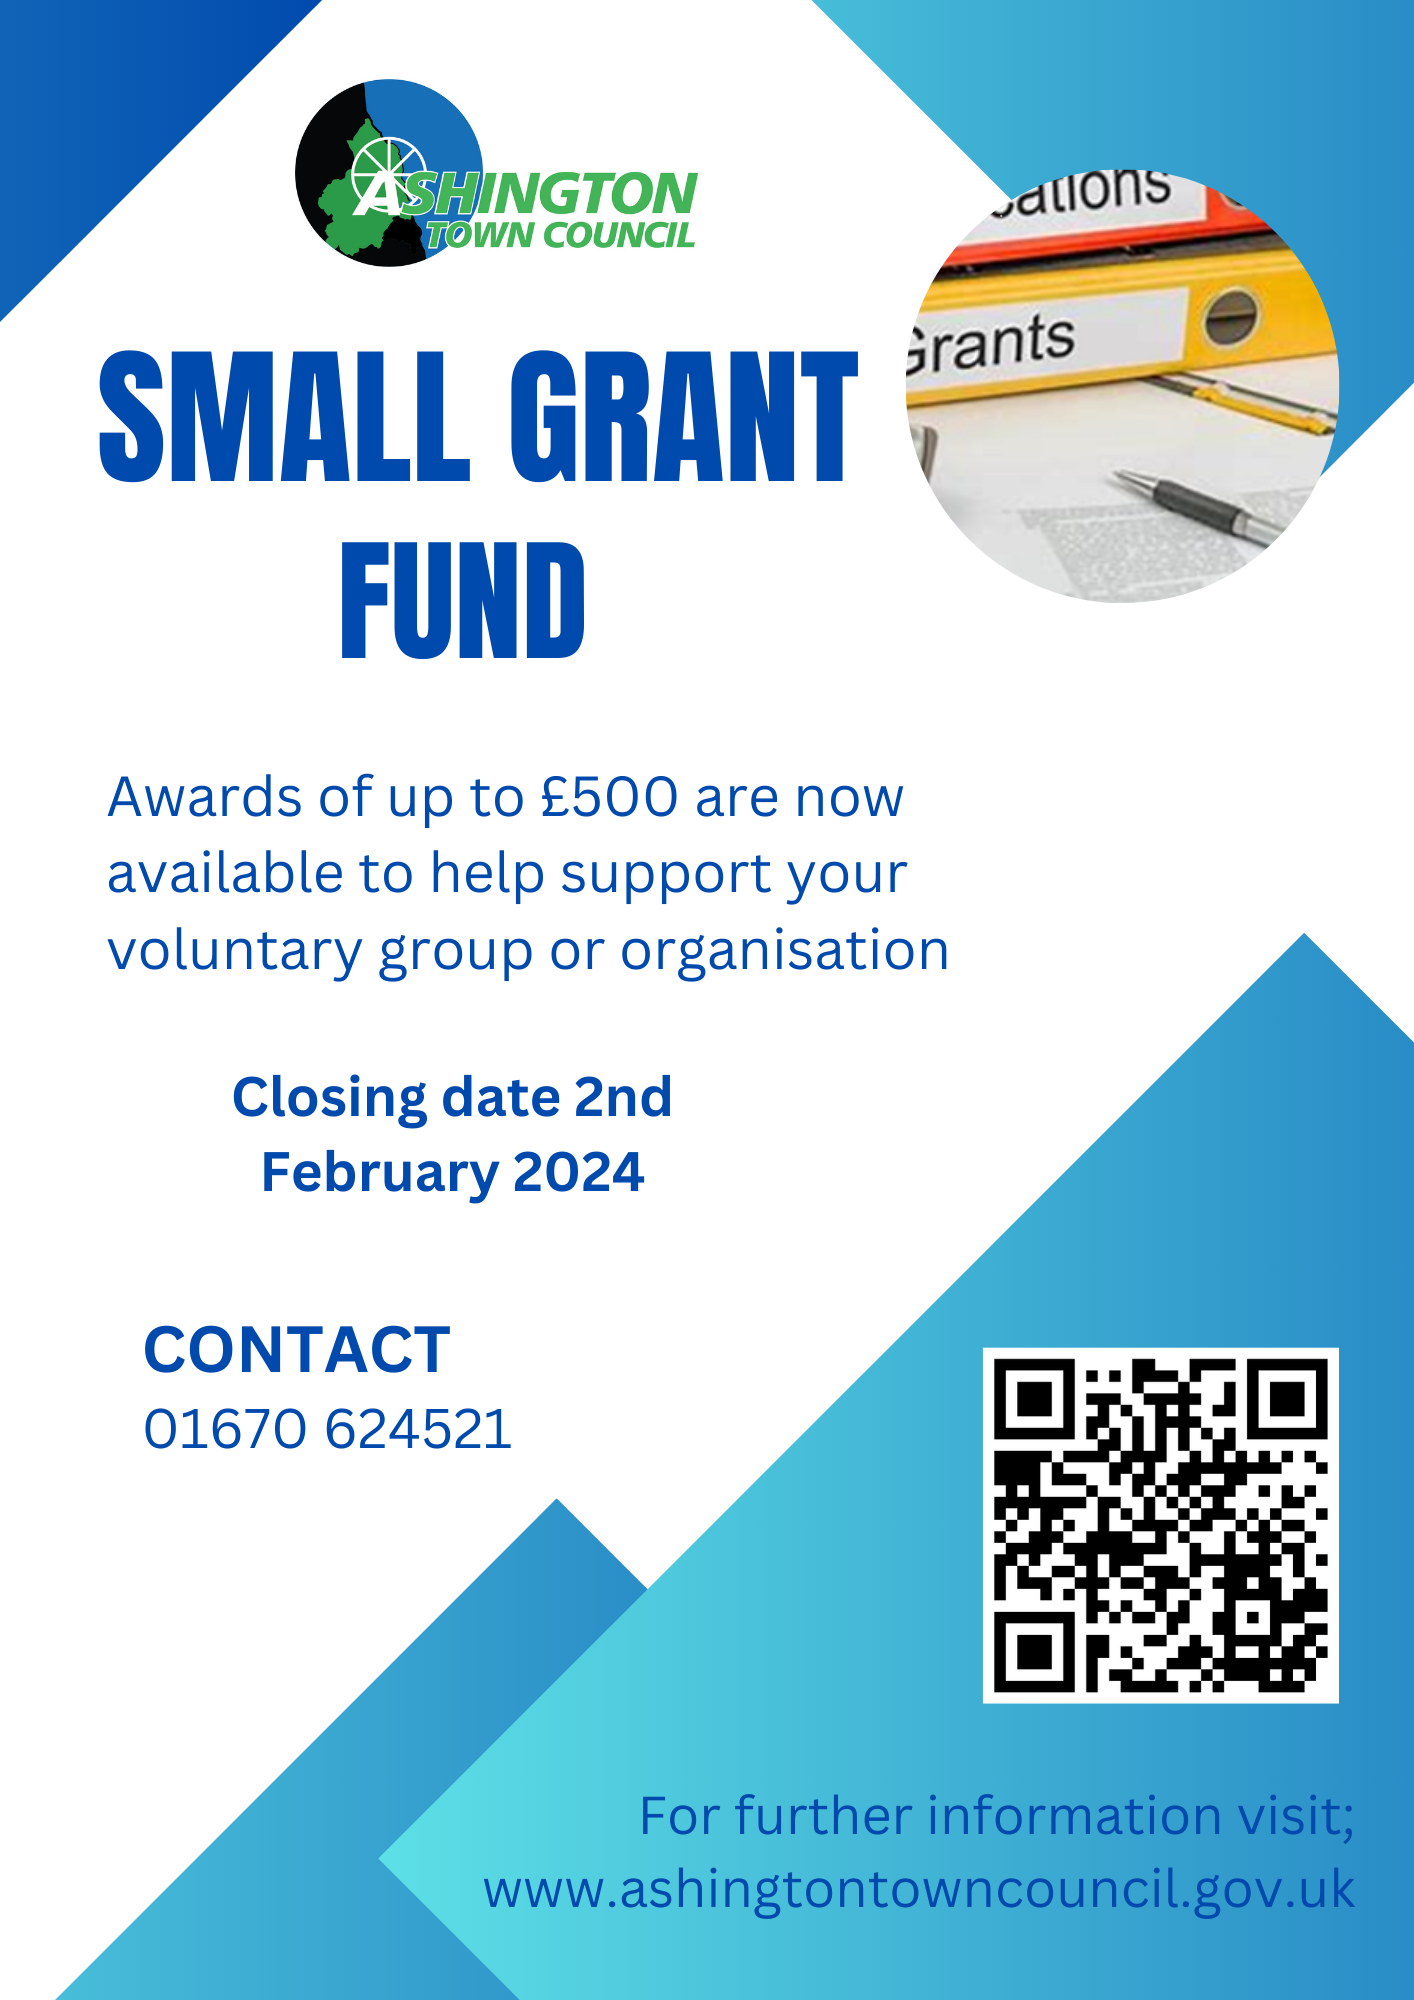 Ashington Town Council Small Grant Fund Now Open For Applications